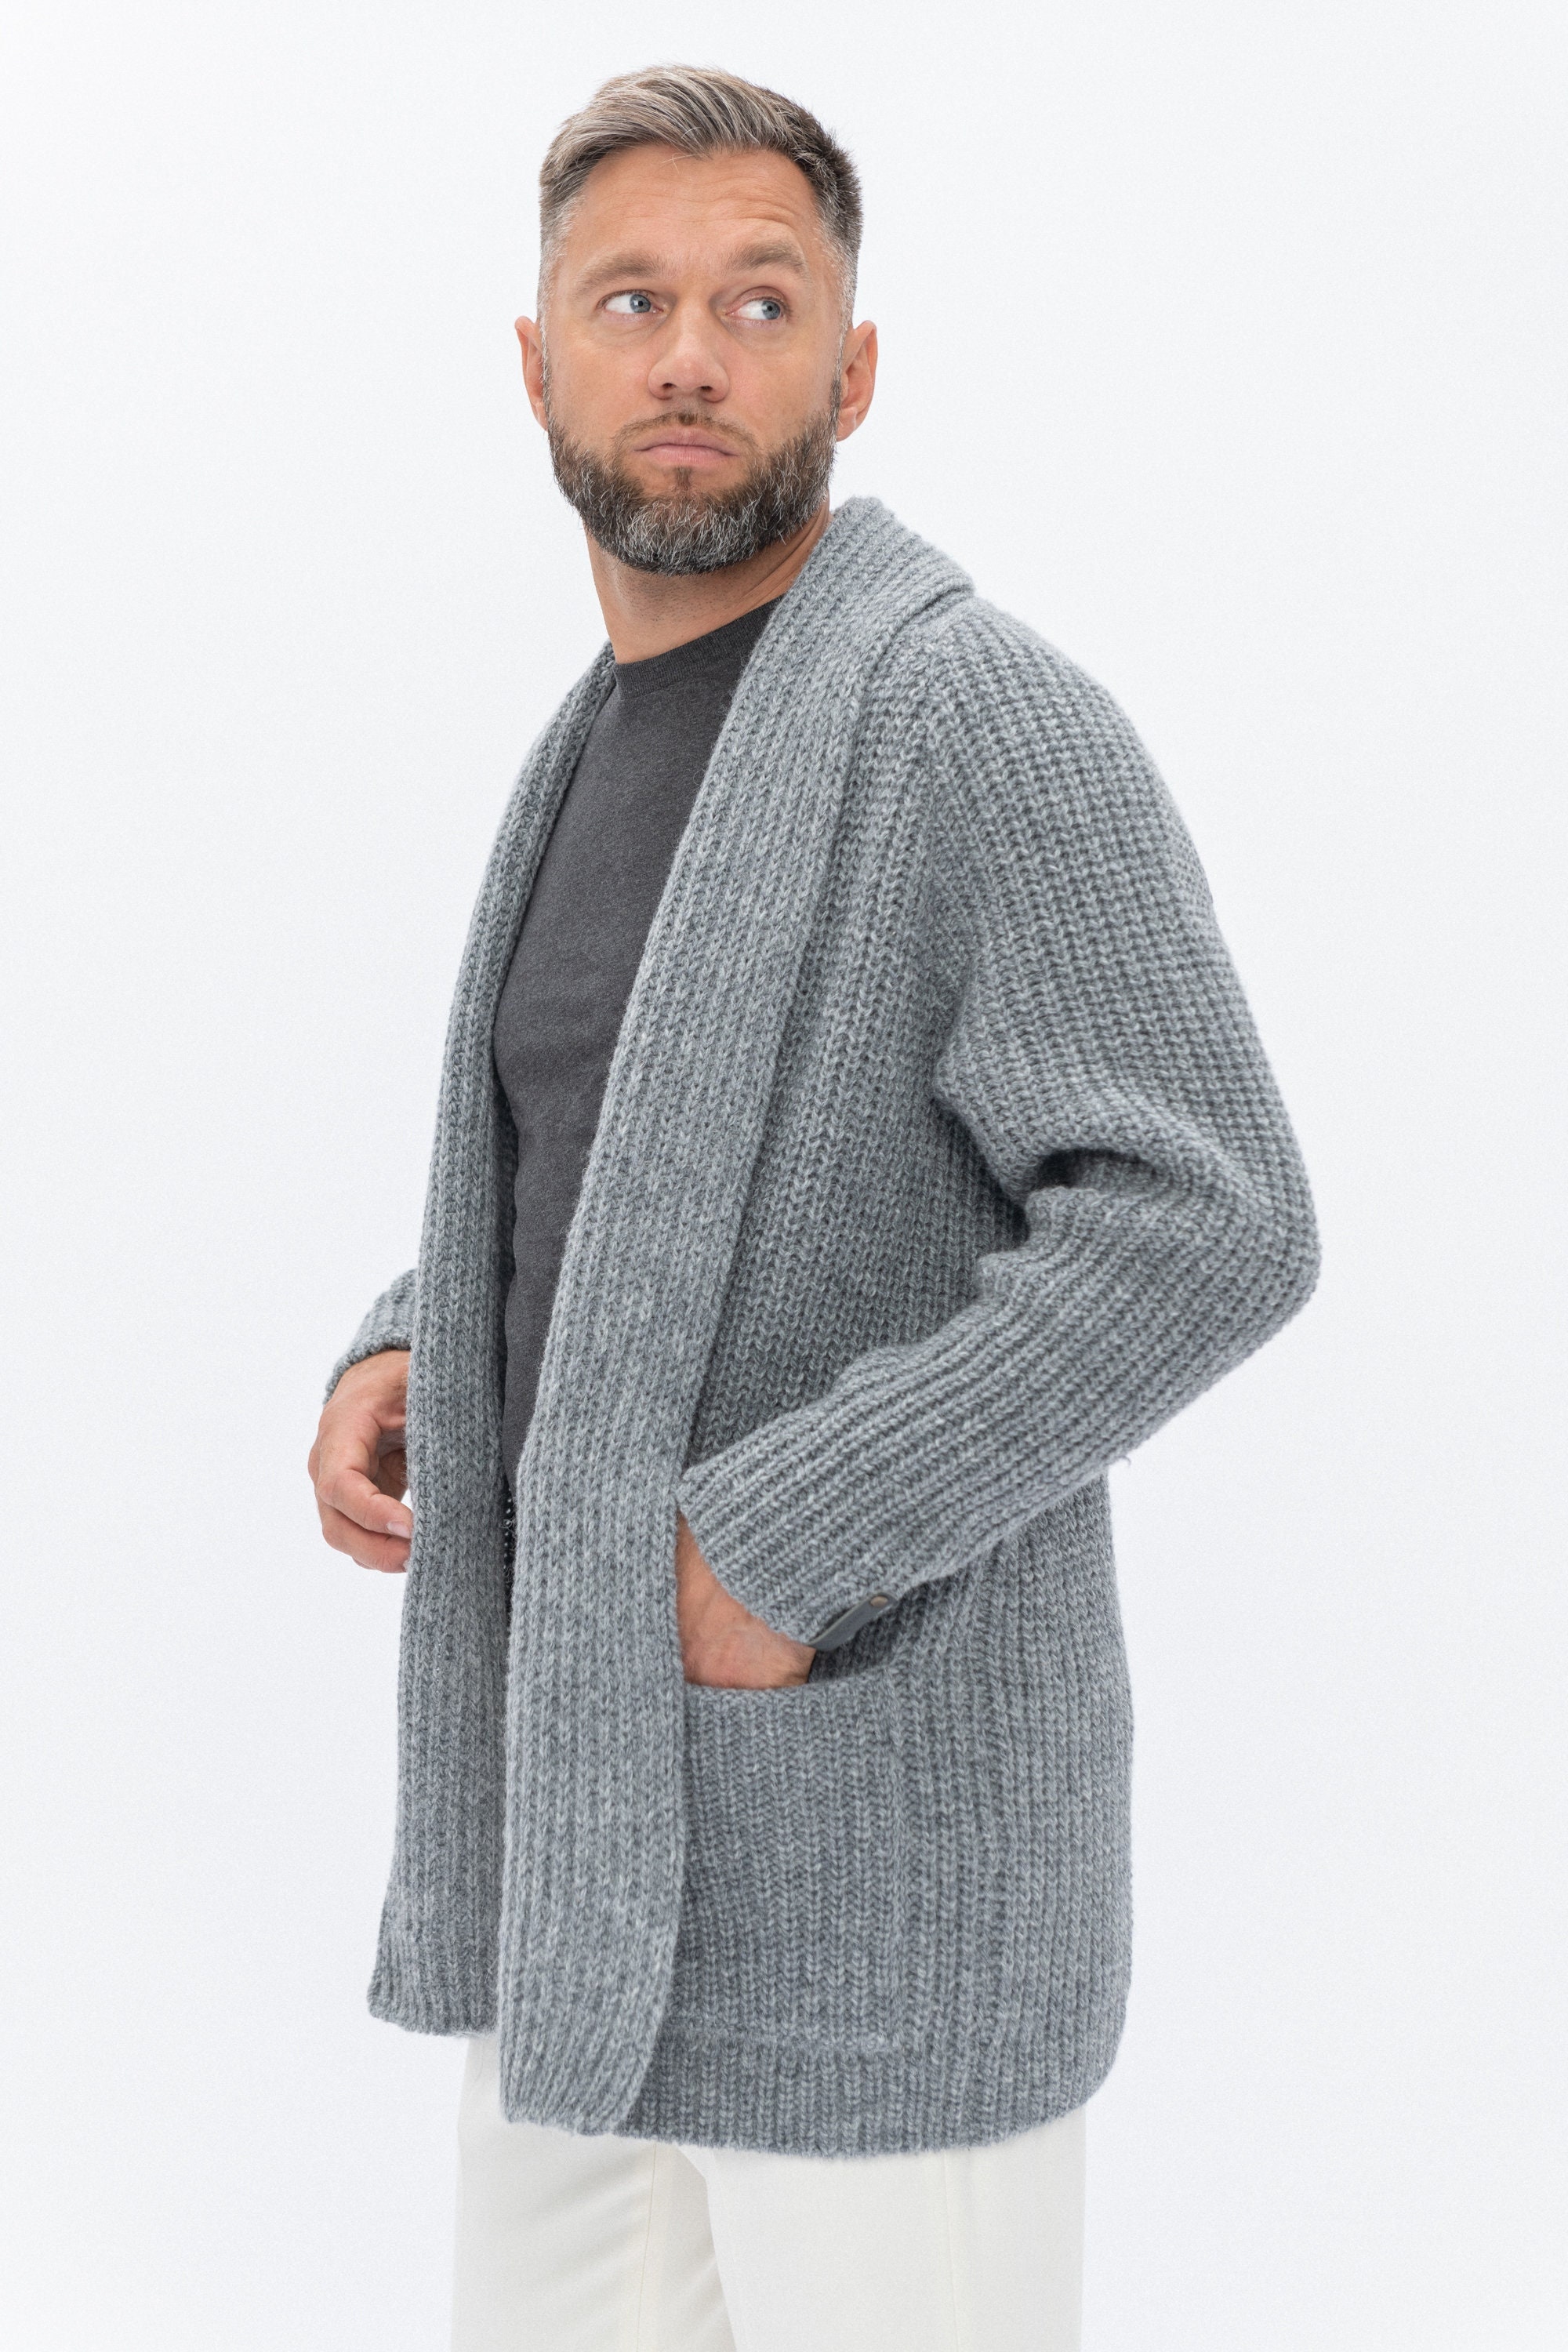 Merino Wool Natural Gray Cardigan for Men, Scandinavian Style Mens Sweater,  Knitted Cardigan With Pockets BENJAMIN -  Canada